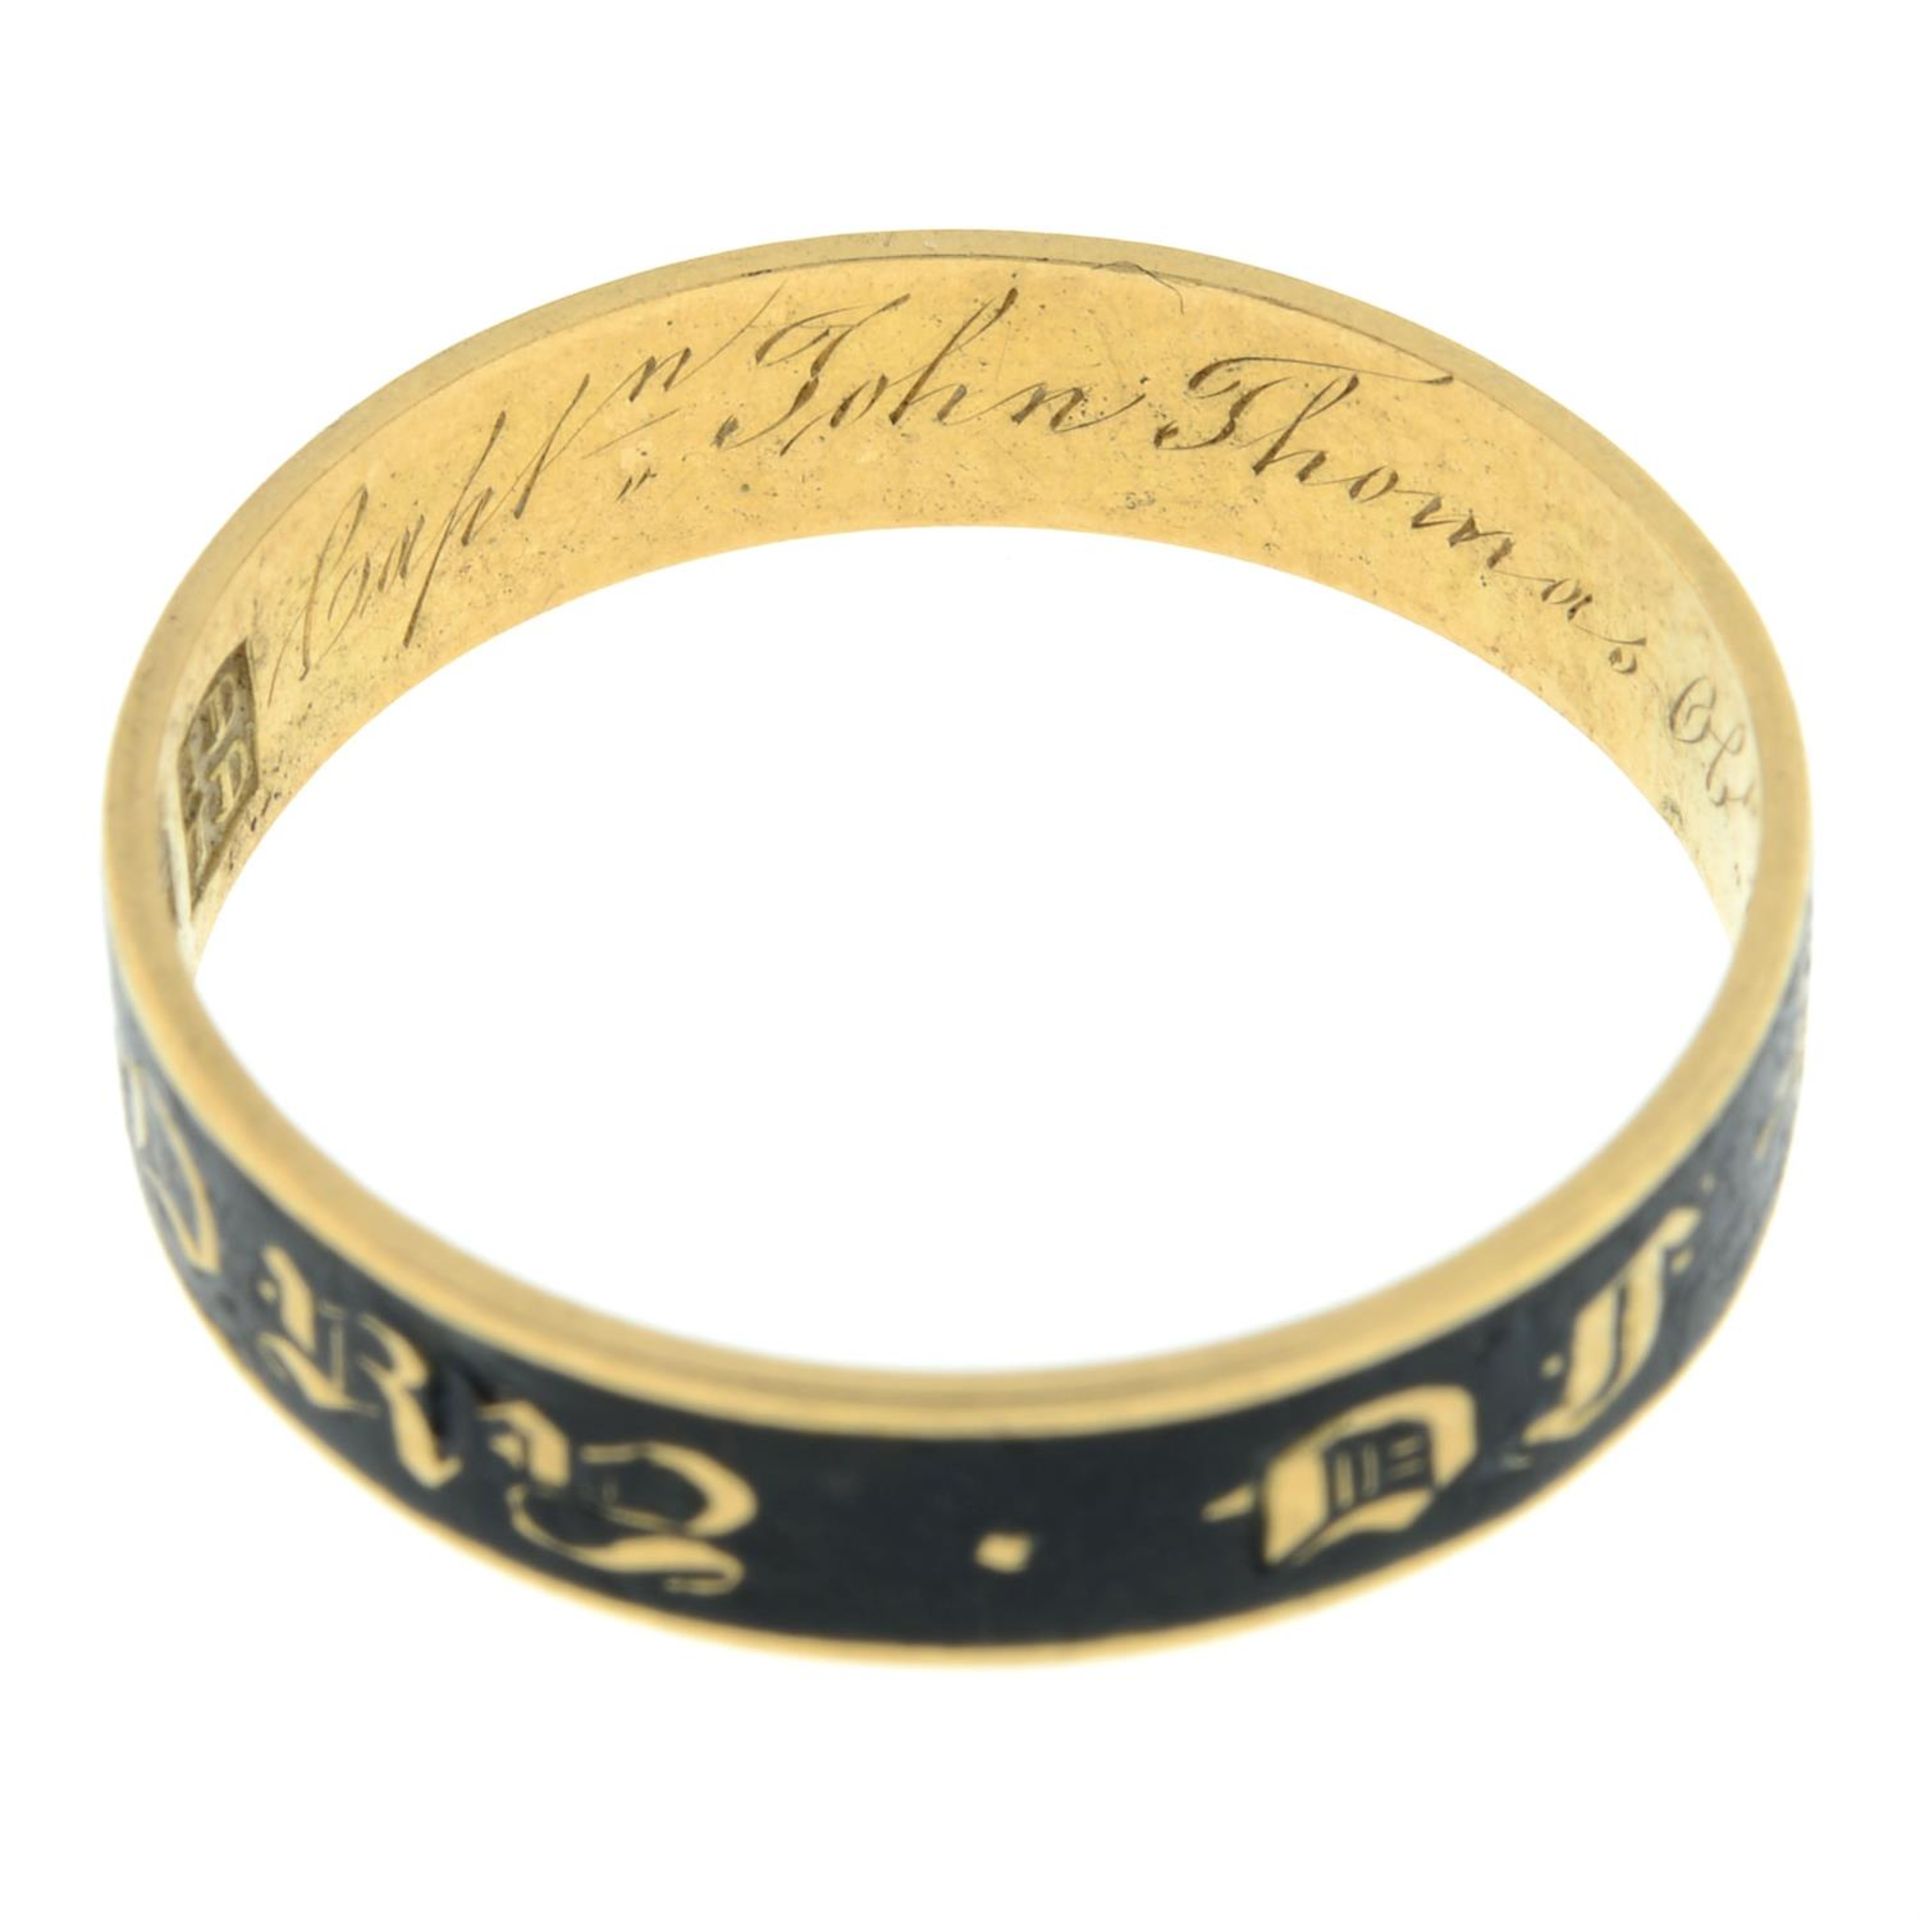 A Georgian 18ct gold black enamel 'In Memory Of' band ring. - Image 5 of 7